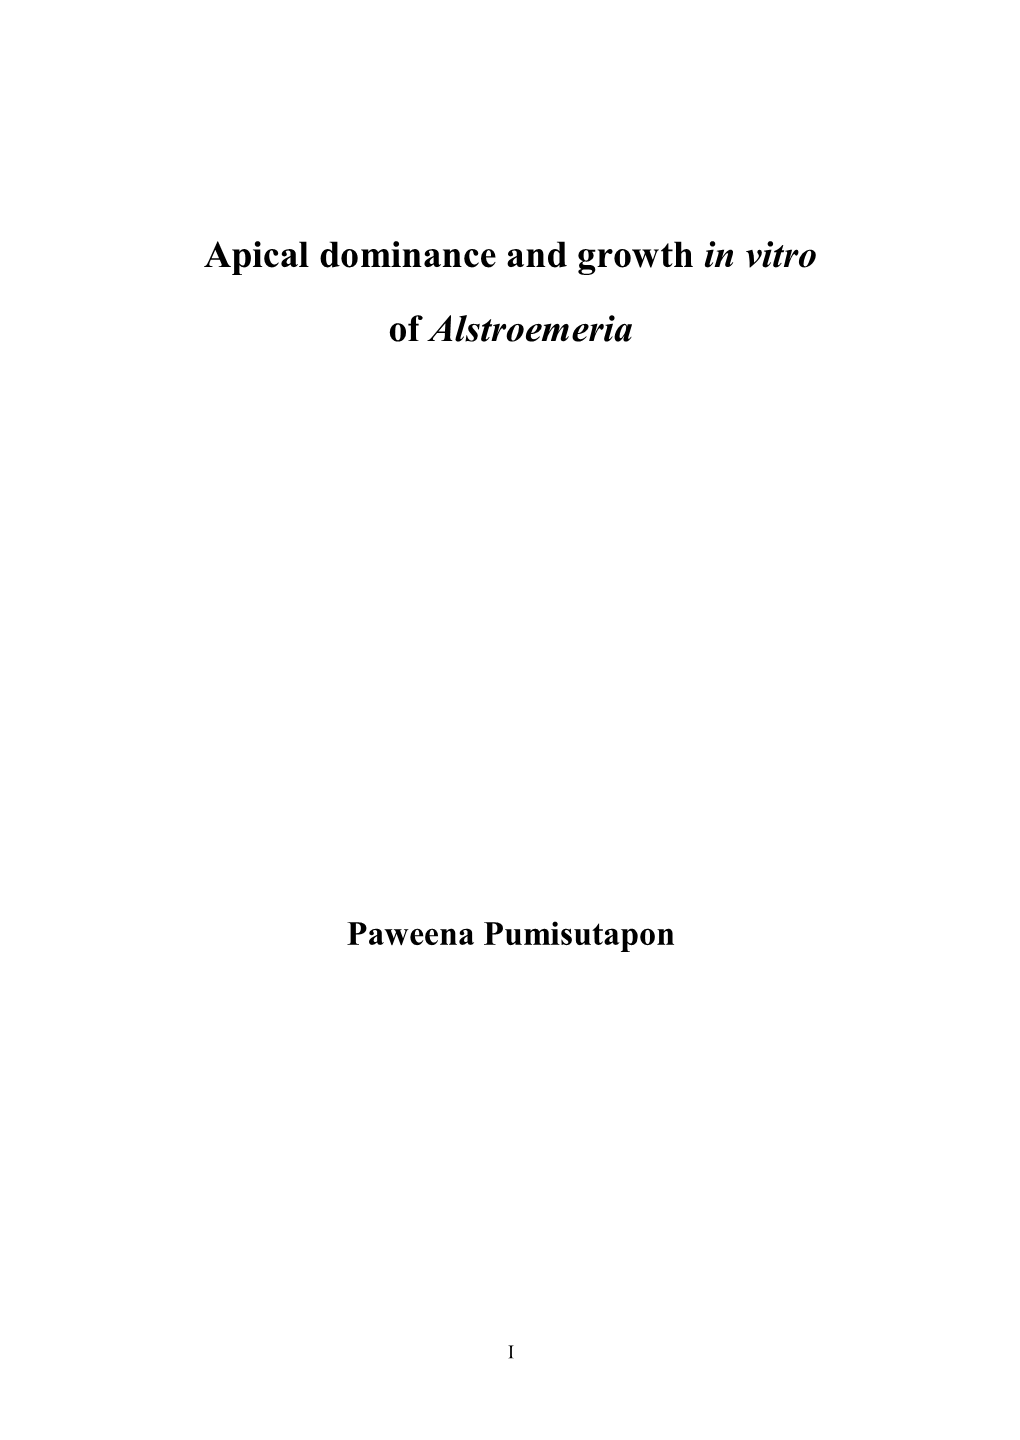 Apical Dominance and Growth in Vitro of Alstroemeria